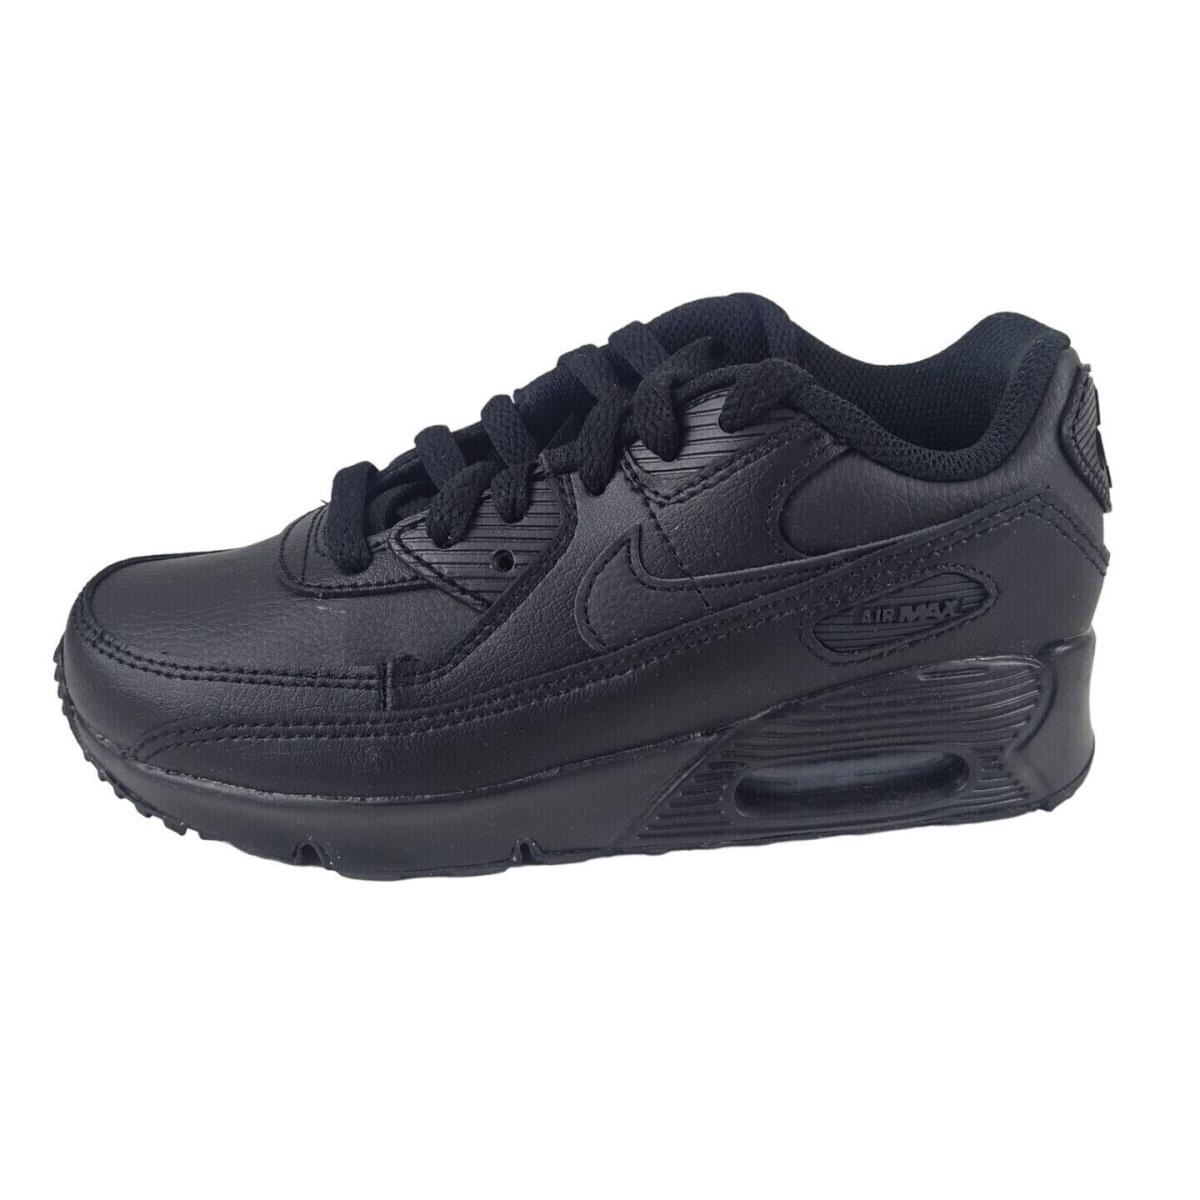 Nike Little Kids Air Max 90 Ltr PS CD6867 001 Sports Leather Shoes Black Sz 12 C